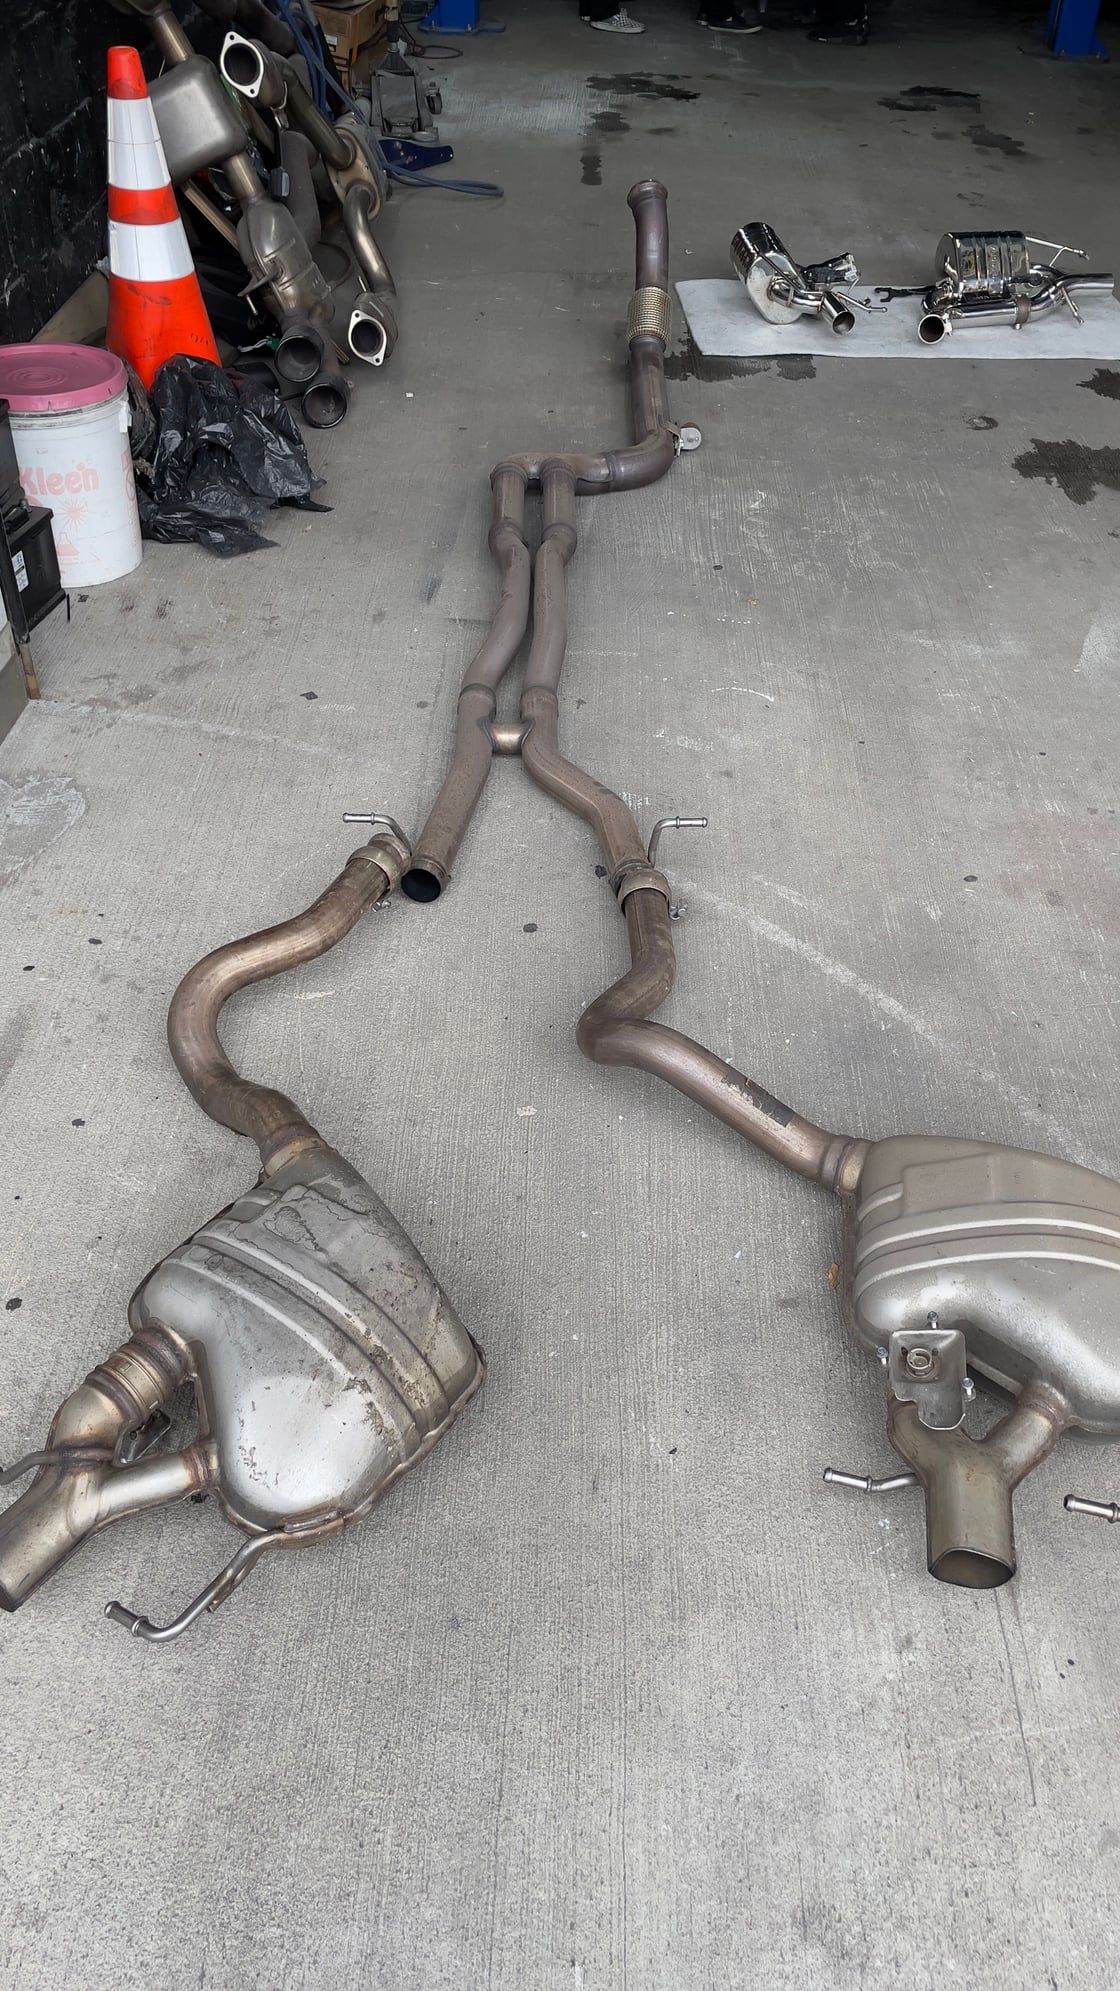 Engine - Exhaust - AMG E53 C238 OEM downpipe with AMG hight performance Exhaust - Used - 2019 to 2023 Mercedes-Benz E53 AMG - Brooklyn, NY 11220, United States